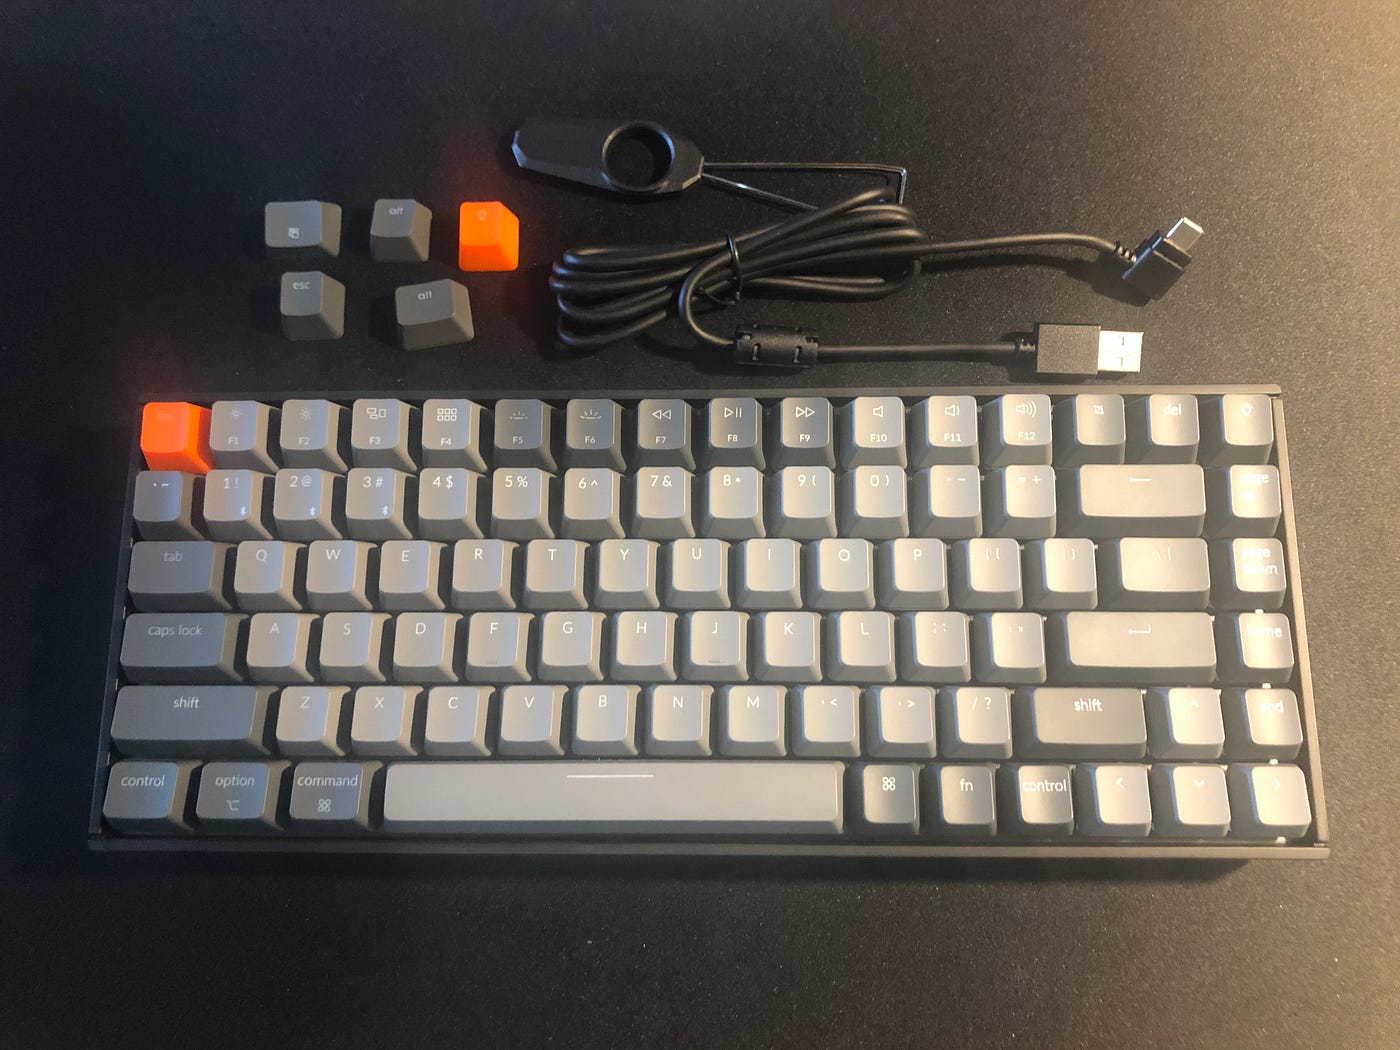 Keychron K2 Keyboard Review. The mechanical keyboard for your Mac